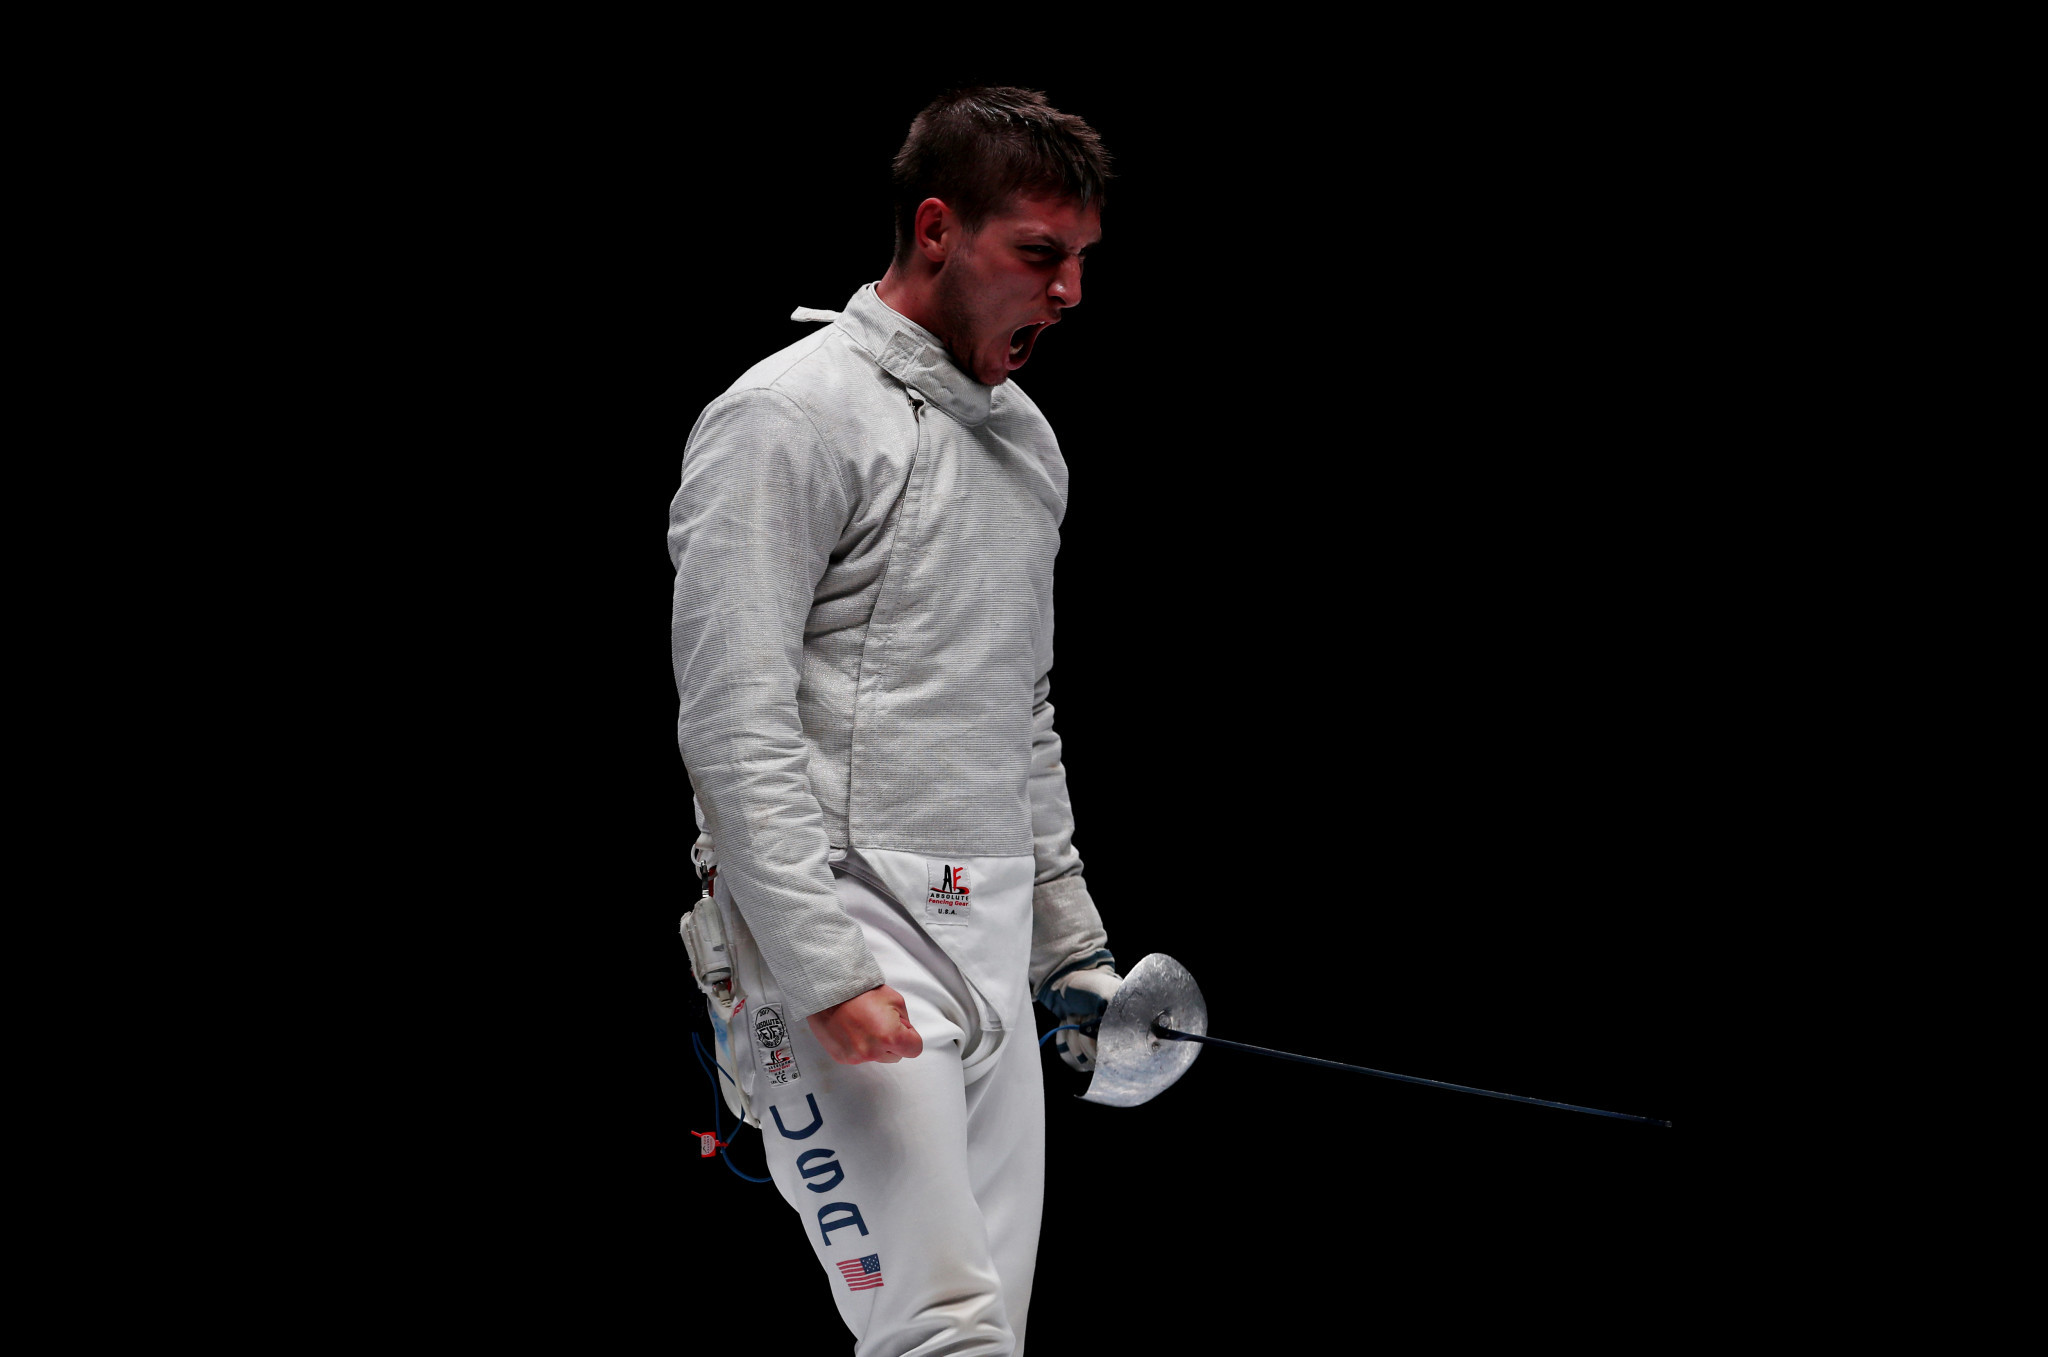 Eli Dershwitz was forced to settle for the silver medal at the latest Sabre Grand Prix ©Getty Images